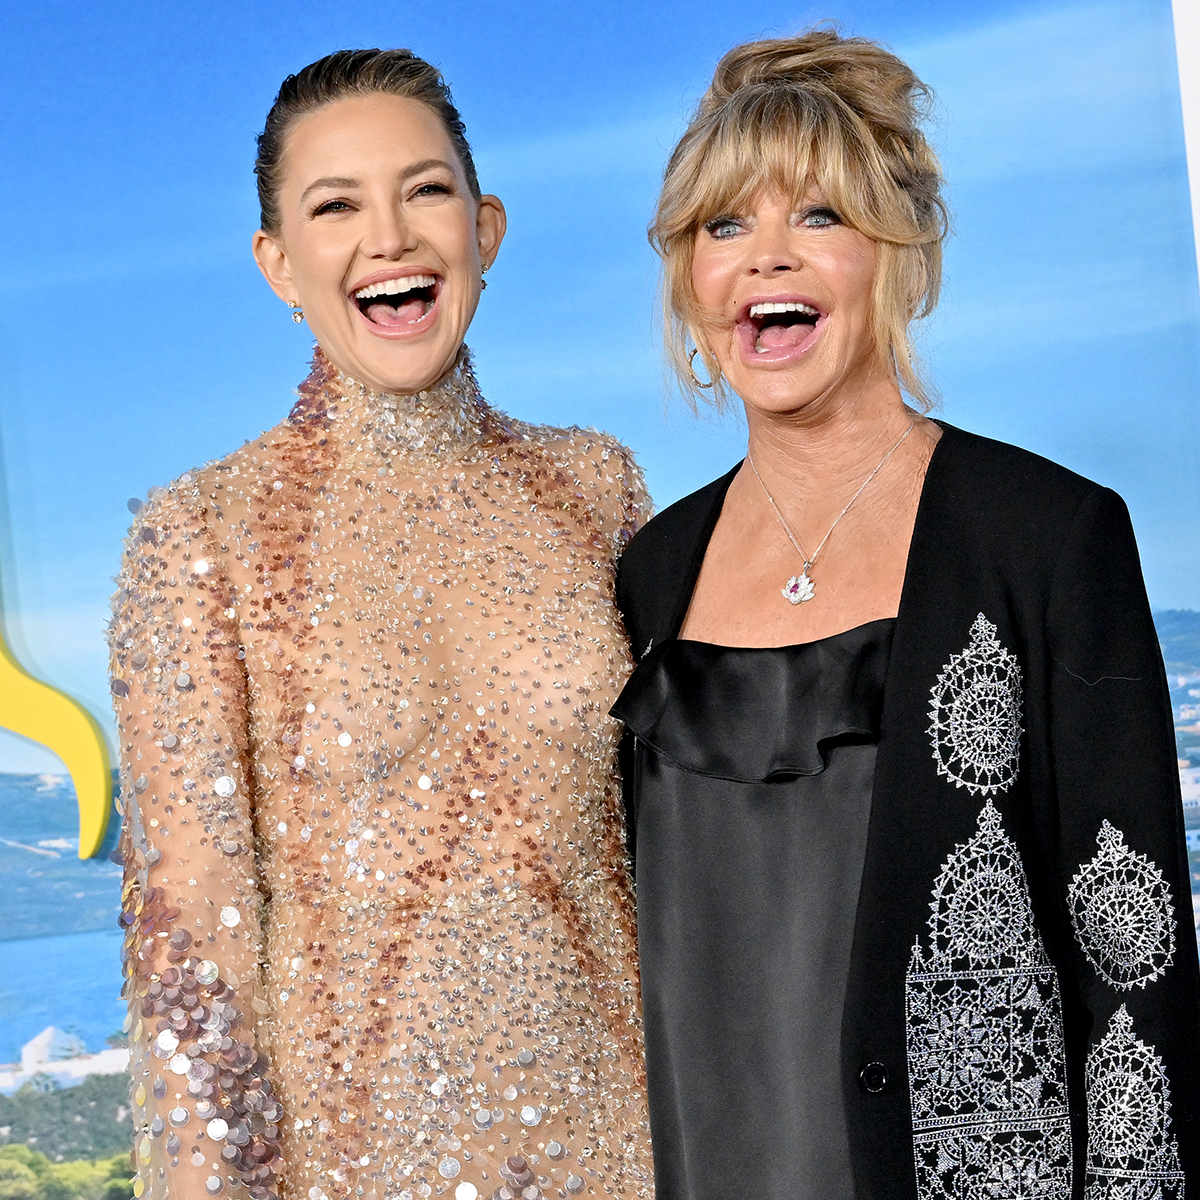 https://akns-images.eonline.com/eol_images/Entire_Site/20221015/rs_1200x1200-221115072624-1200-Kate-Hudson-Goldie-Hawn-LT-111522-GettyImages-1441630962.jpg?fit=around%7C1200:1200&output-quality=90&crop=1200:1200;center,top